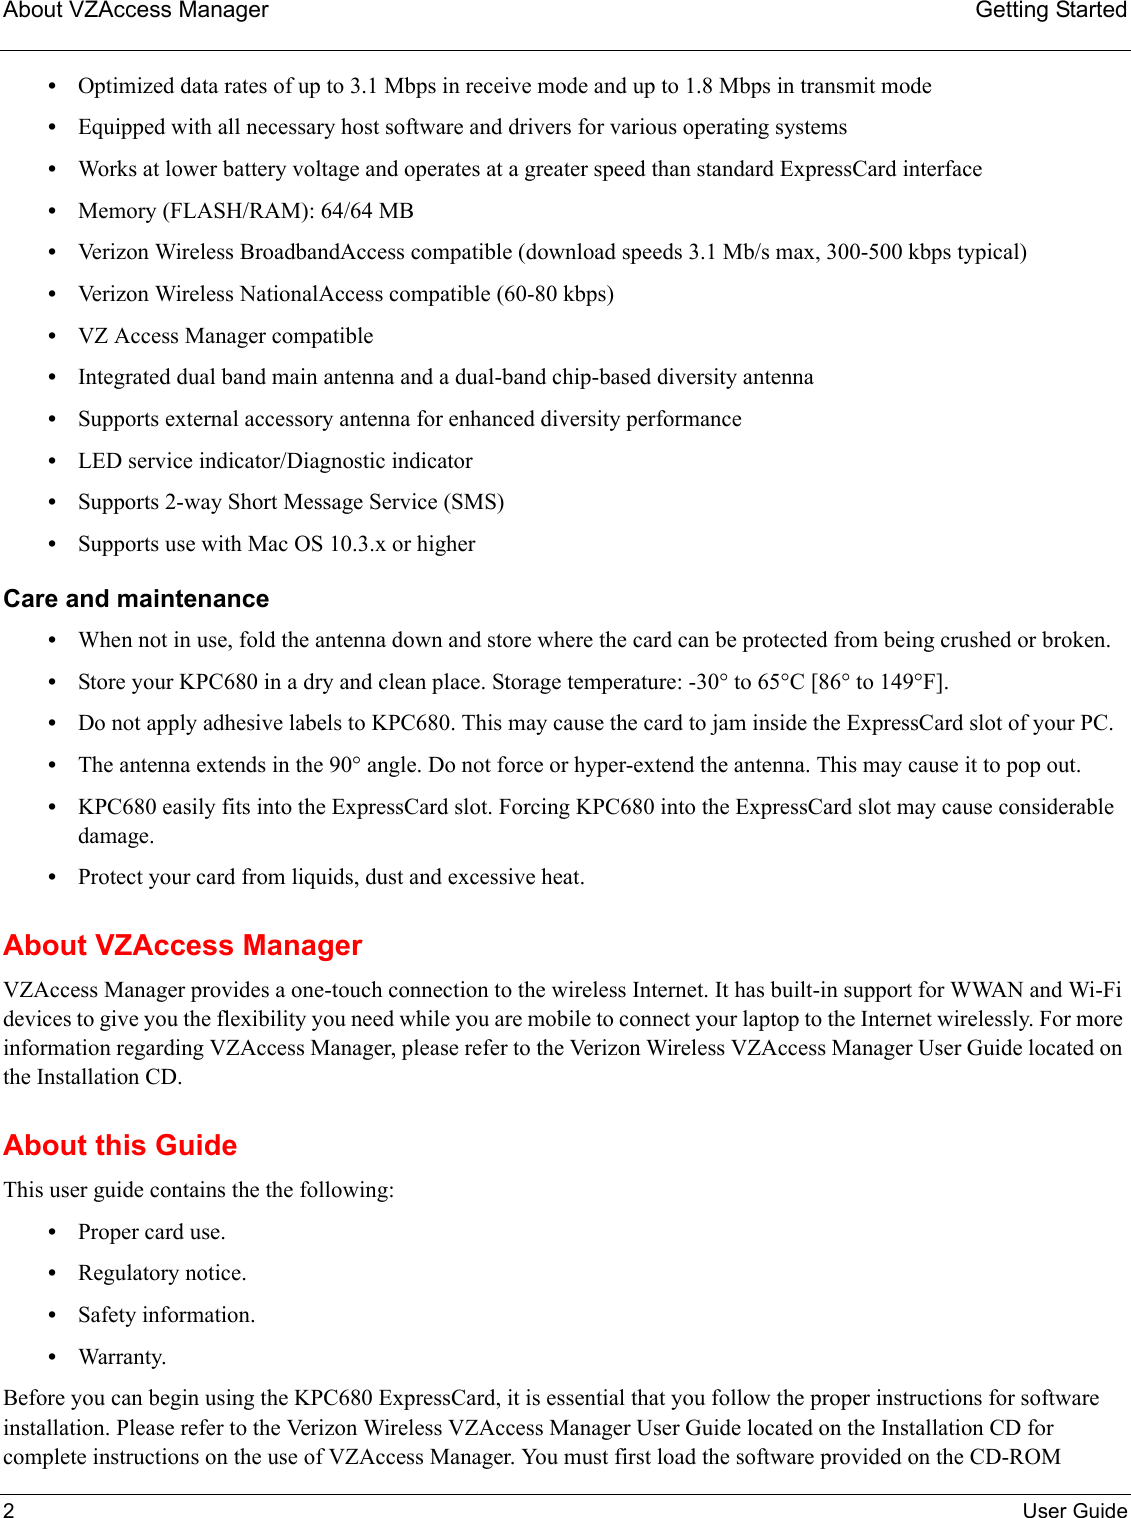 About VZAccess Manager Getting Started2User Guide•Optimized data rates of up to 3.1 Mbps in receive mode and up to 1.8 Mbps in transmit mode•Equipped with all necessary host software and drivers for various operating systems•Works at lower battery voltage and operates at a greater speed than standard ExpressCard interface•Memory (FLASH/RAM): 64/64 MB•Verizon Wireless BroadbandAccess compatible (download speeds 3.1 Mb/s max, 300-500 kbps typical)•Verizon Wireless NationalAccess compatible (60-80 kbps)•VZ Access Manager compatible•Integrated dual band main antenna and a dual-band chip-based diversity antenna•Supports external accessory antenna for enhanced diversity performance•LED service indicator/Diagnostic indicator•Supports 2-way Short Message Service (SMS)•Supports use with Mac OS 10.3.x or higherCare and maintenance•When not in use, fold the antenna down and store where the card can be protected from being crushed or broken.•Store your KPC680 in a dry and clean place. Storage temperature: -30° to 65°C [86° to 149°F].•Do not apply adhesive labels to KPC680. This may cause the card to jam inside the ExpressCard slot of your PC.•The antenna extends in the 90° angle. Do not force or hyper-extend the antenna. This may cause it to pop out.•KPC680 easily fits into the ExpressCard slot. Forcing KPC680 into the ExpressCard slot may cause considerable damage.•Protect your card from liquids, dust and excessive heat.About VZAccess ManagerVZAccess Manager provides a one-touch connection to the wireless Internet. It has built-in support for WWAN and Wi-Fi devices to give you the flexibility you need while you are mobile to connect your laptop to the Internet wirelessly. For more information regarding VZAccess Manager, please refer to the Verizon Wireless VZAccess Manager User Guide located on the Installation CD.About this GuideThis user guide contains the the following:•Proper card use.•Regulatory notice.•Safety information.•Warranty.Before you can begin using the KPC680 ExpressCard, it is essential that you follow the proper instructions for software installation. Please refer to the Verizon Wireless VZAccess Manager User Guide located on the Installation CD for complete instructions on the use of VZAccess Manager. You must first load the software provided on the CD-ROM 